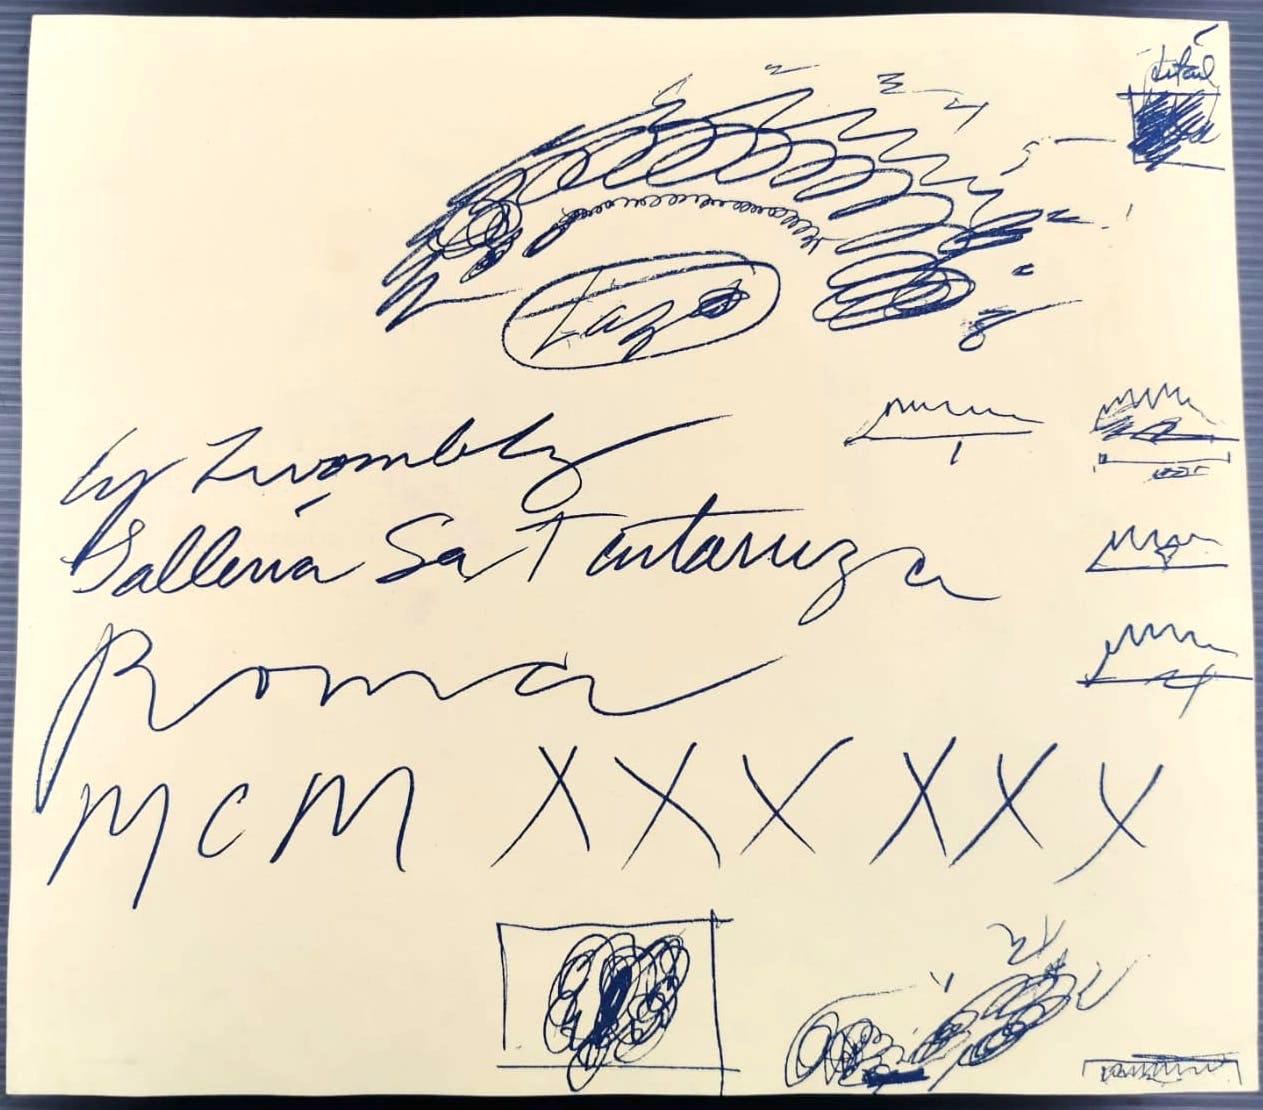 Cy Twombly Exhibition Leaflet - Galleria La Tartaruga 1960 - Contemporary Art by (after) Cy Twombly